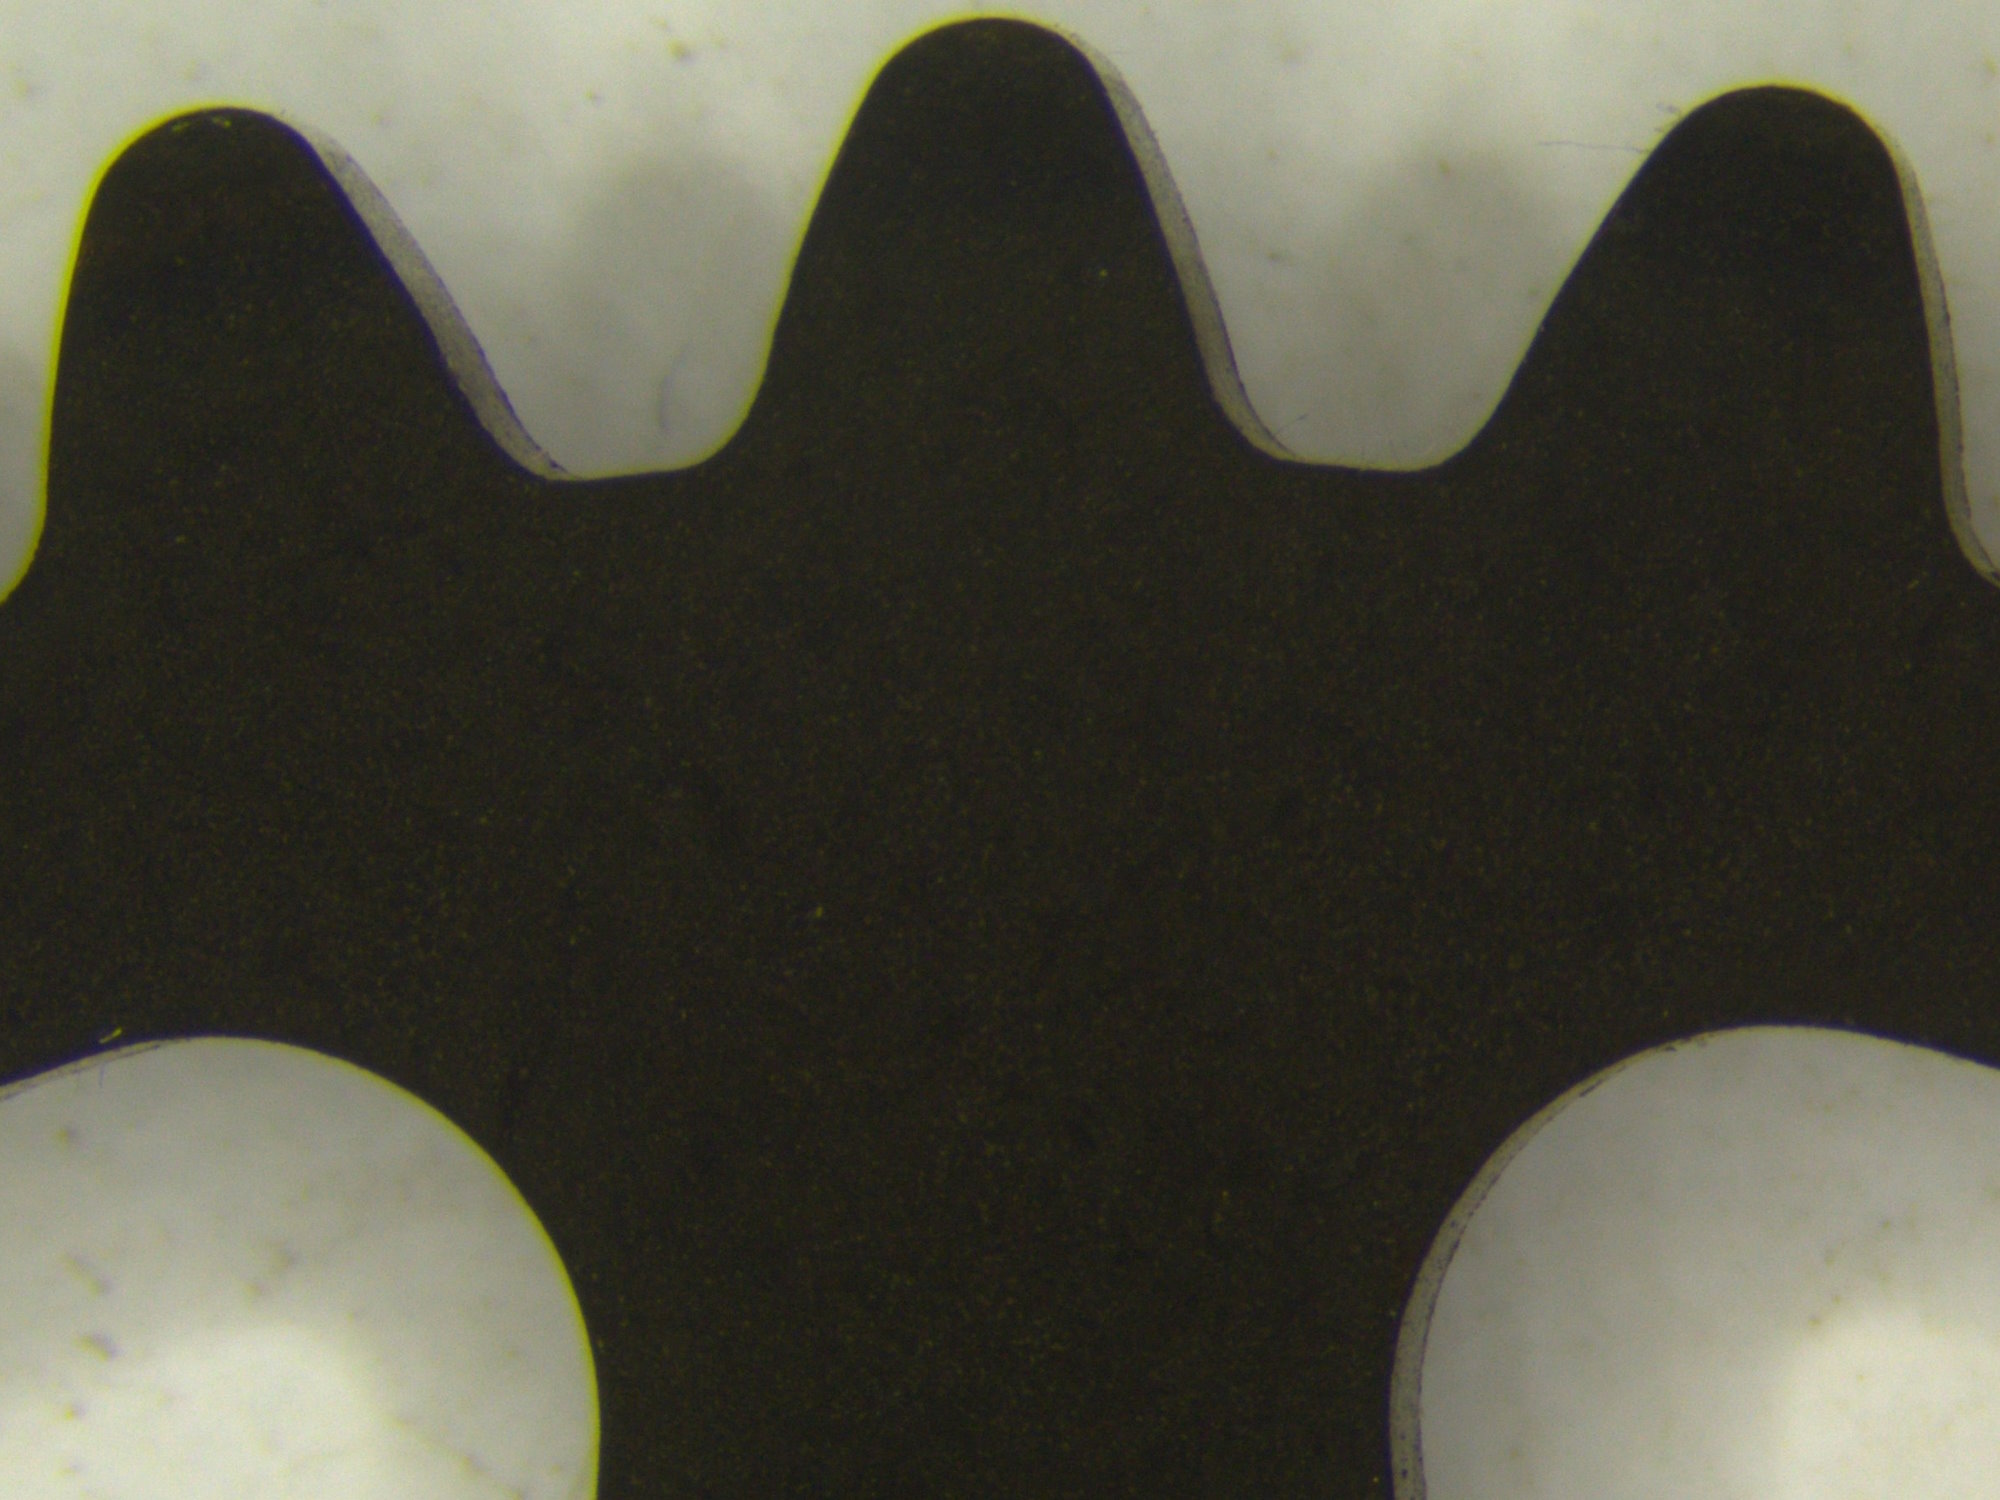 Sprocket - RL with crossed polarizers: Reflective areas